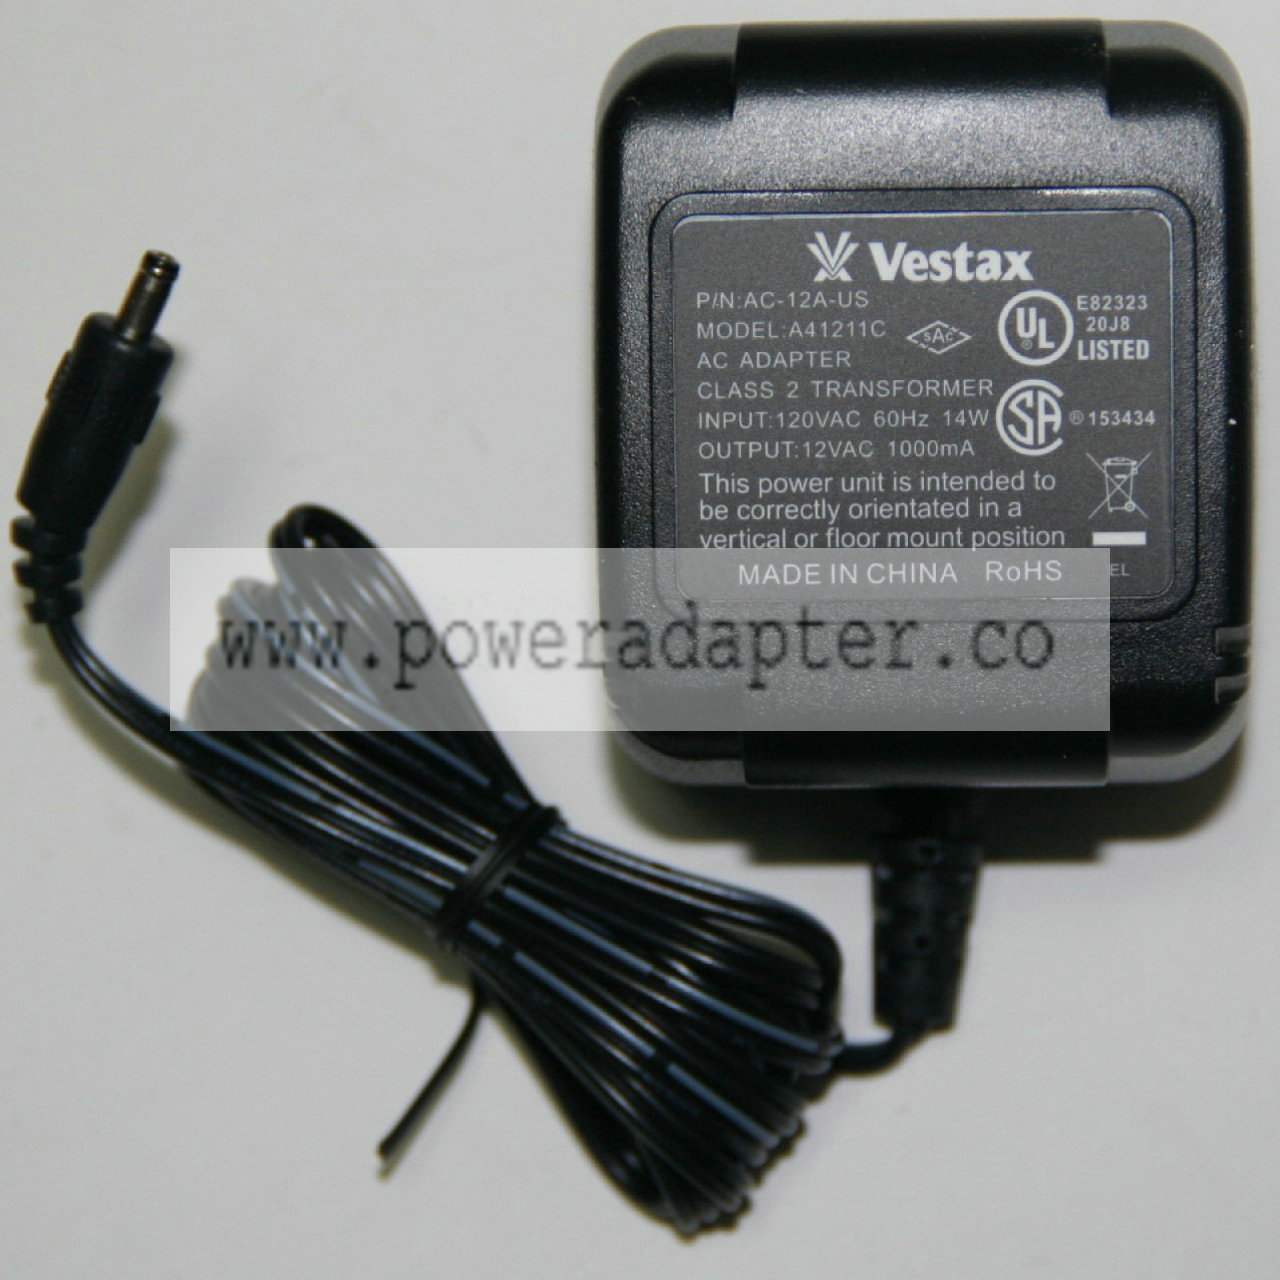 Generic replacement for Vestax AC-12A Power Adapter for many mixers etc Product Description This is an aftermarket repl - Click Image to Close